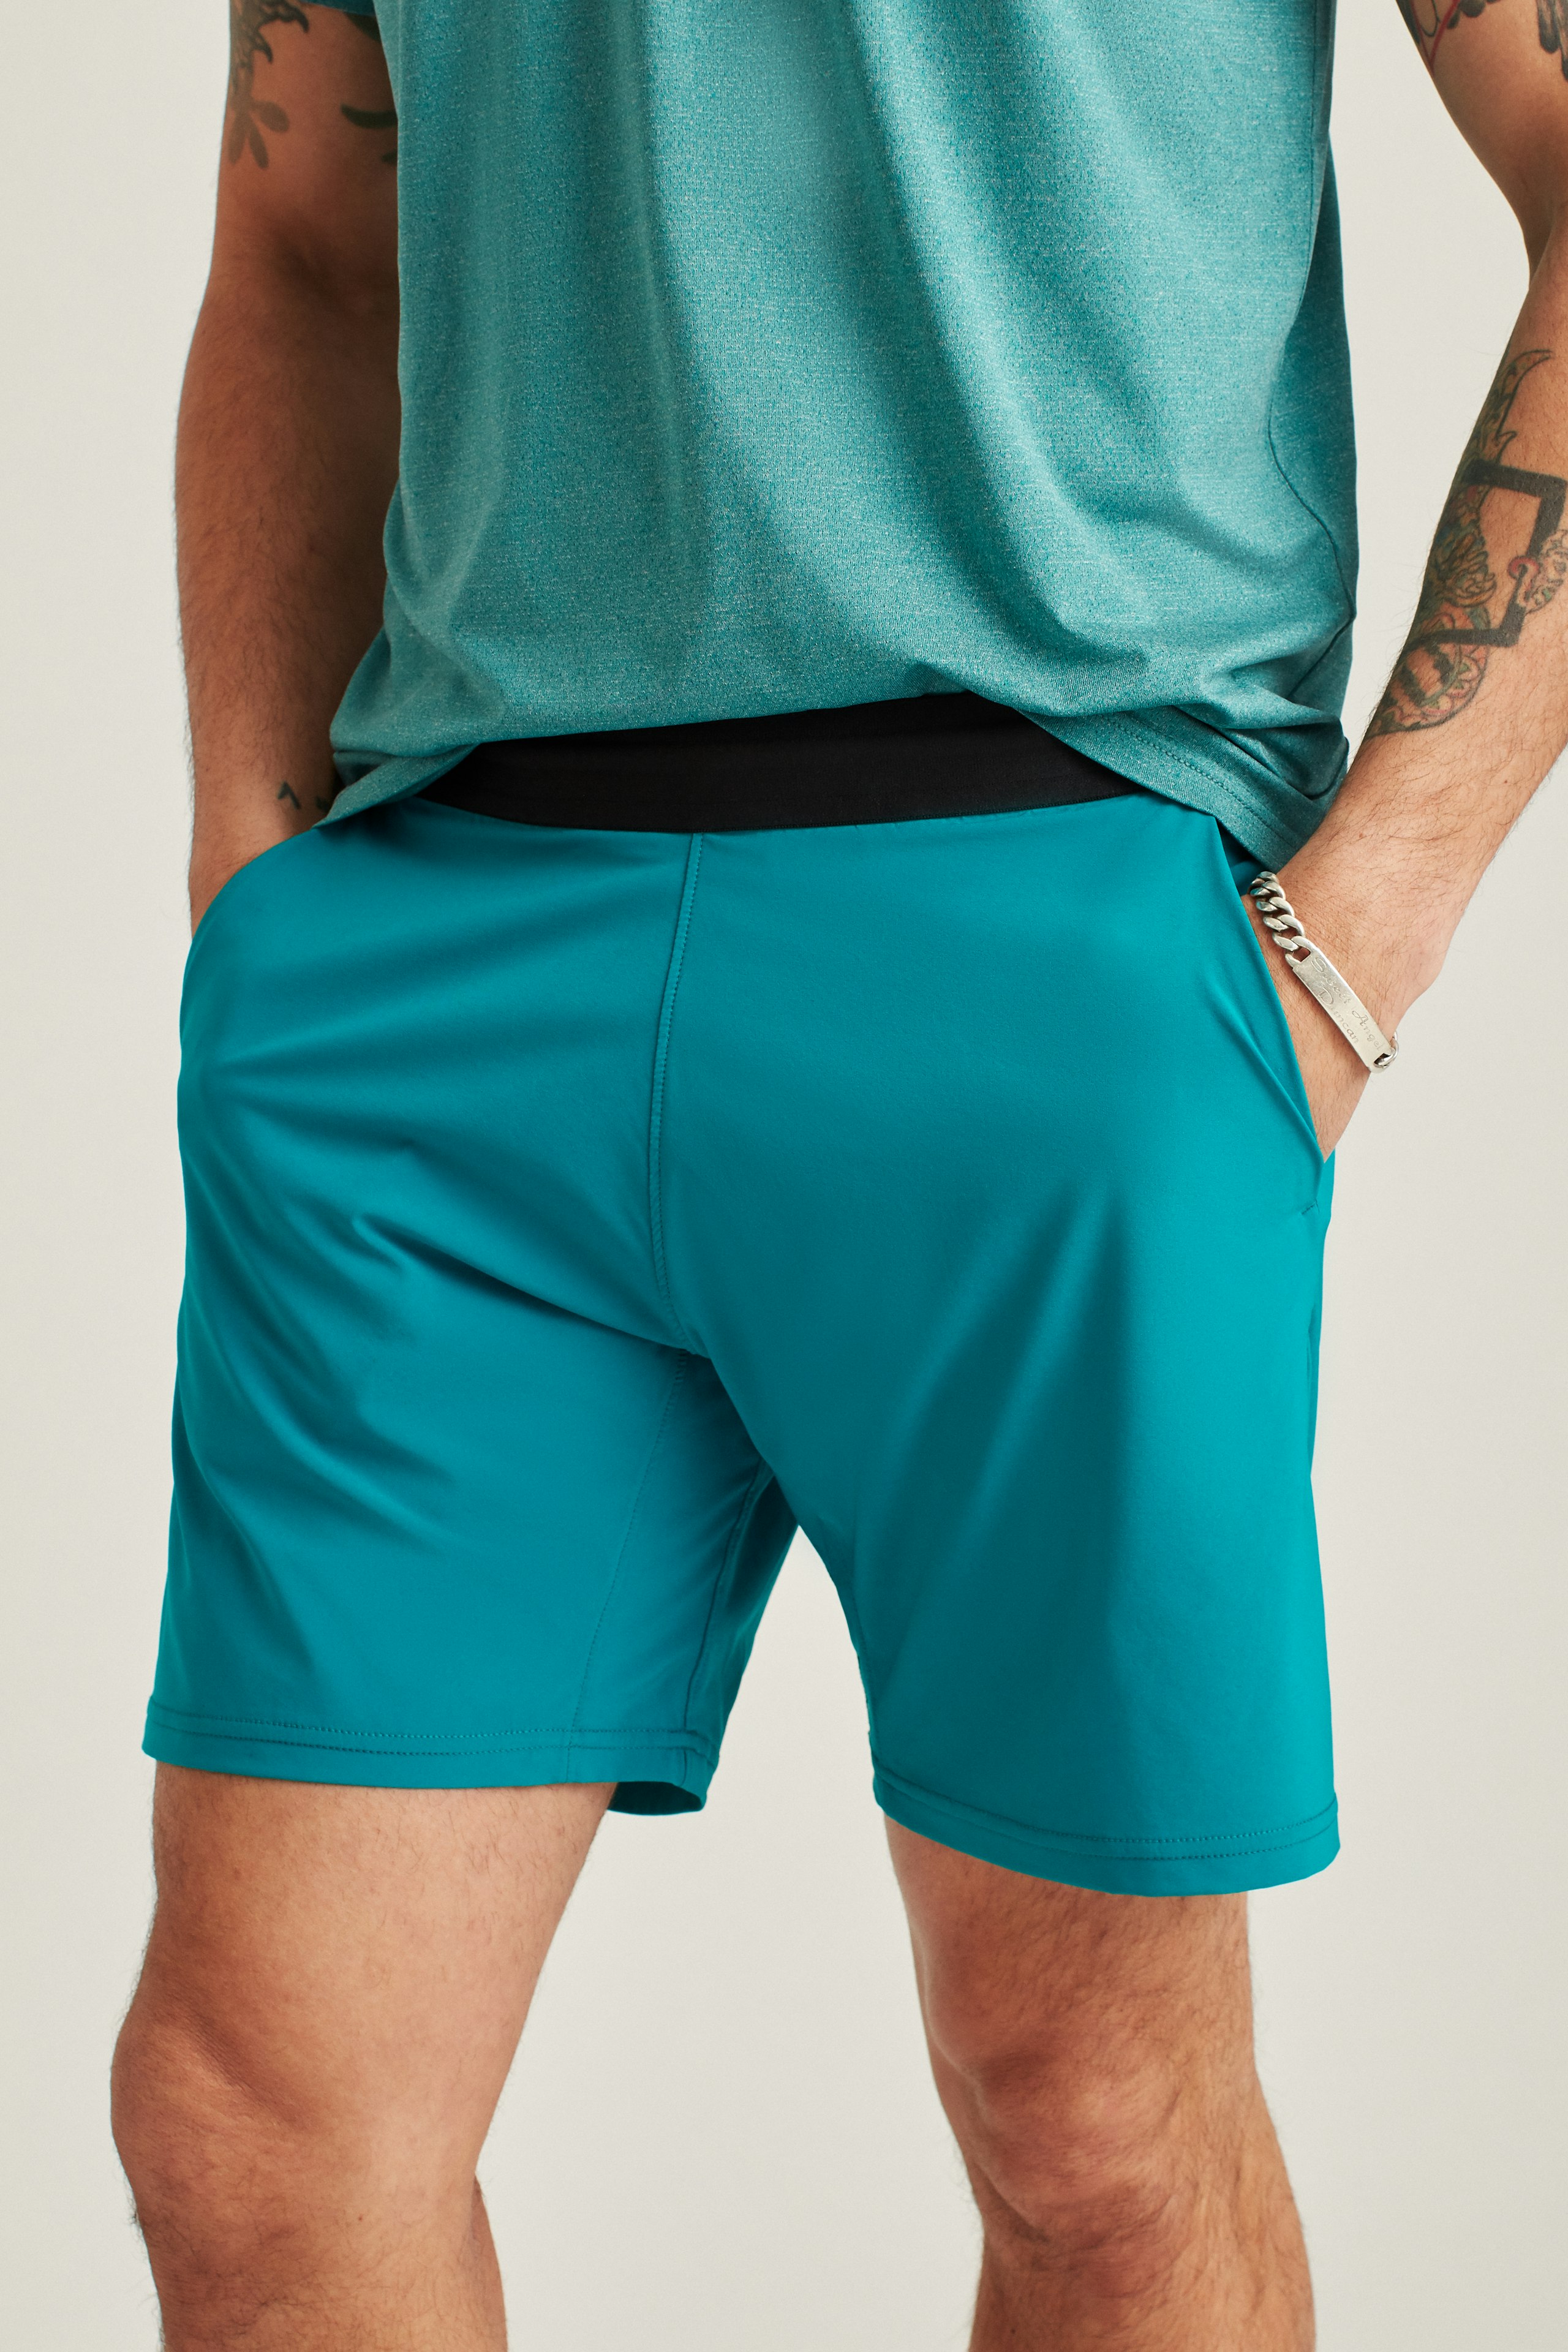 The Unlined Gym Short